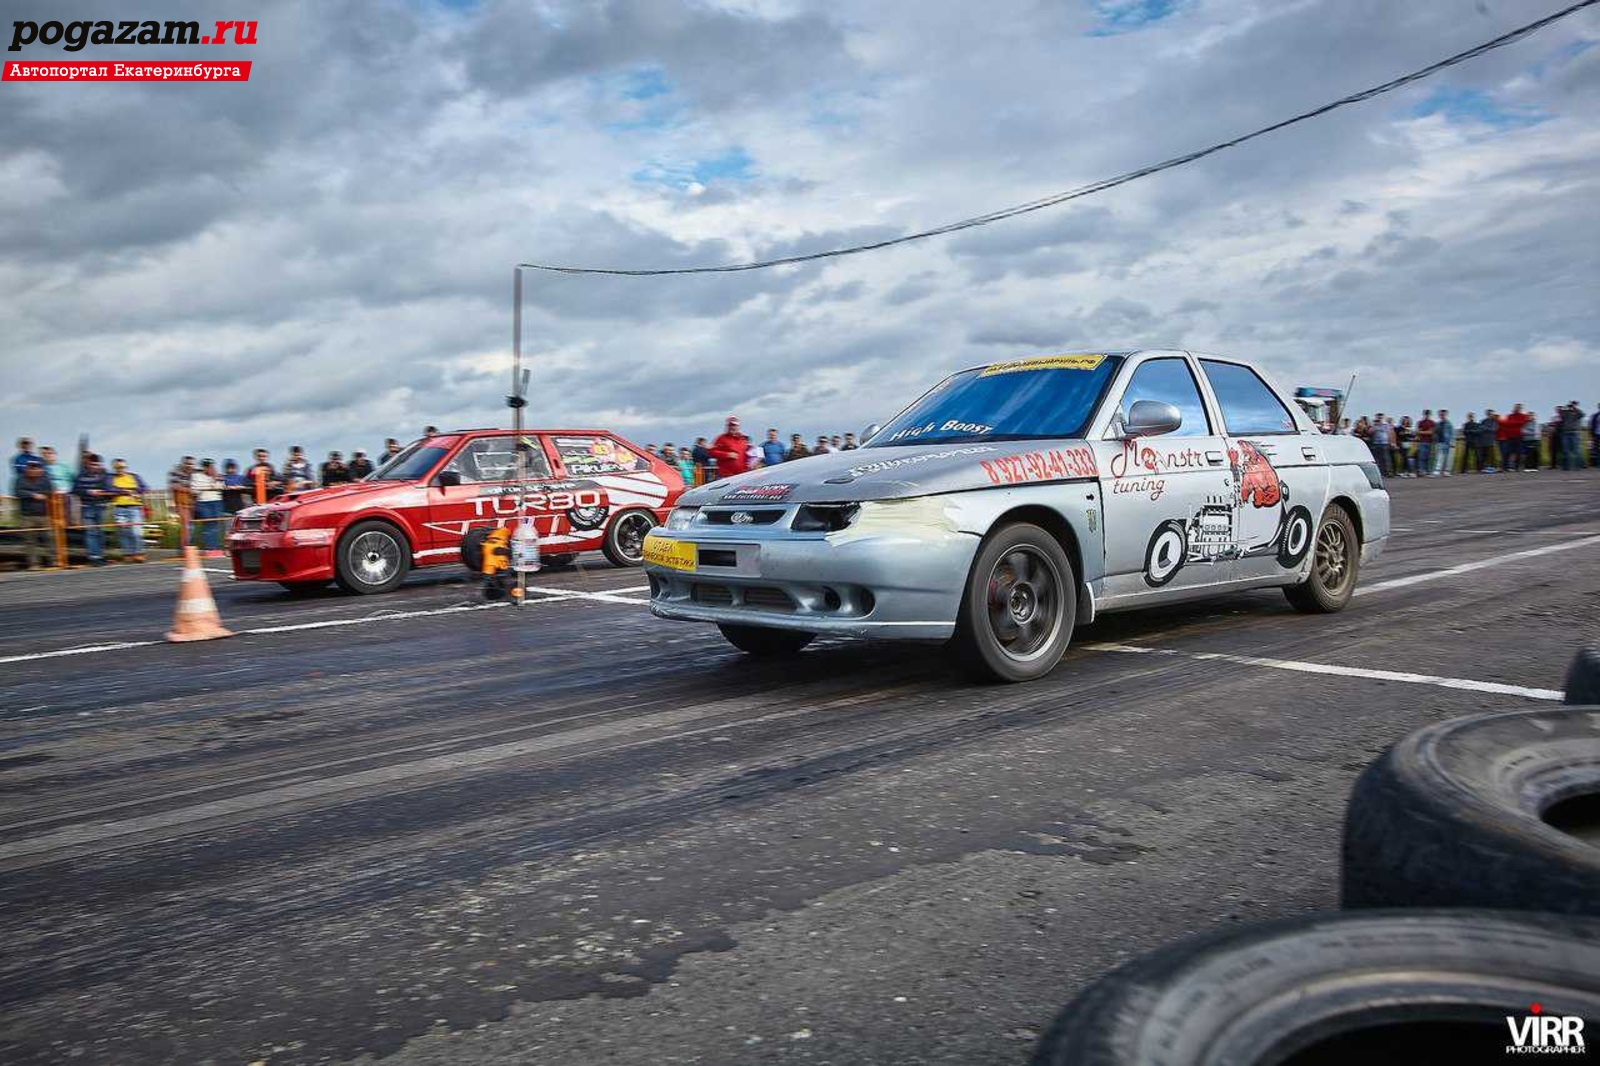 Competition racing